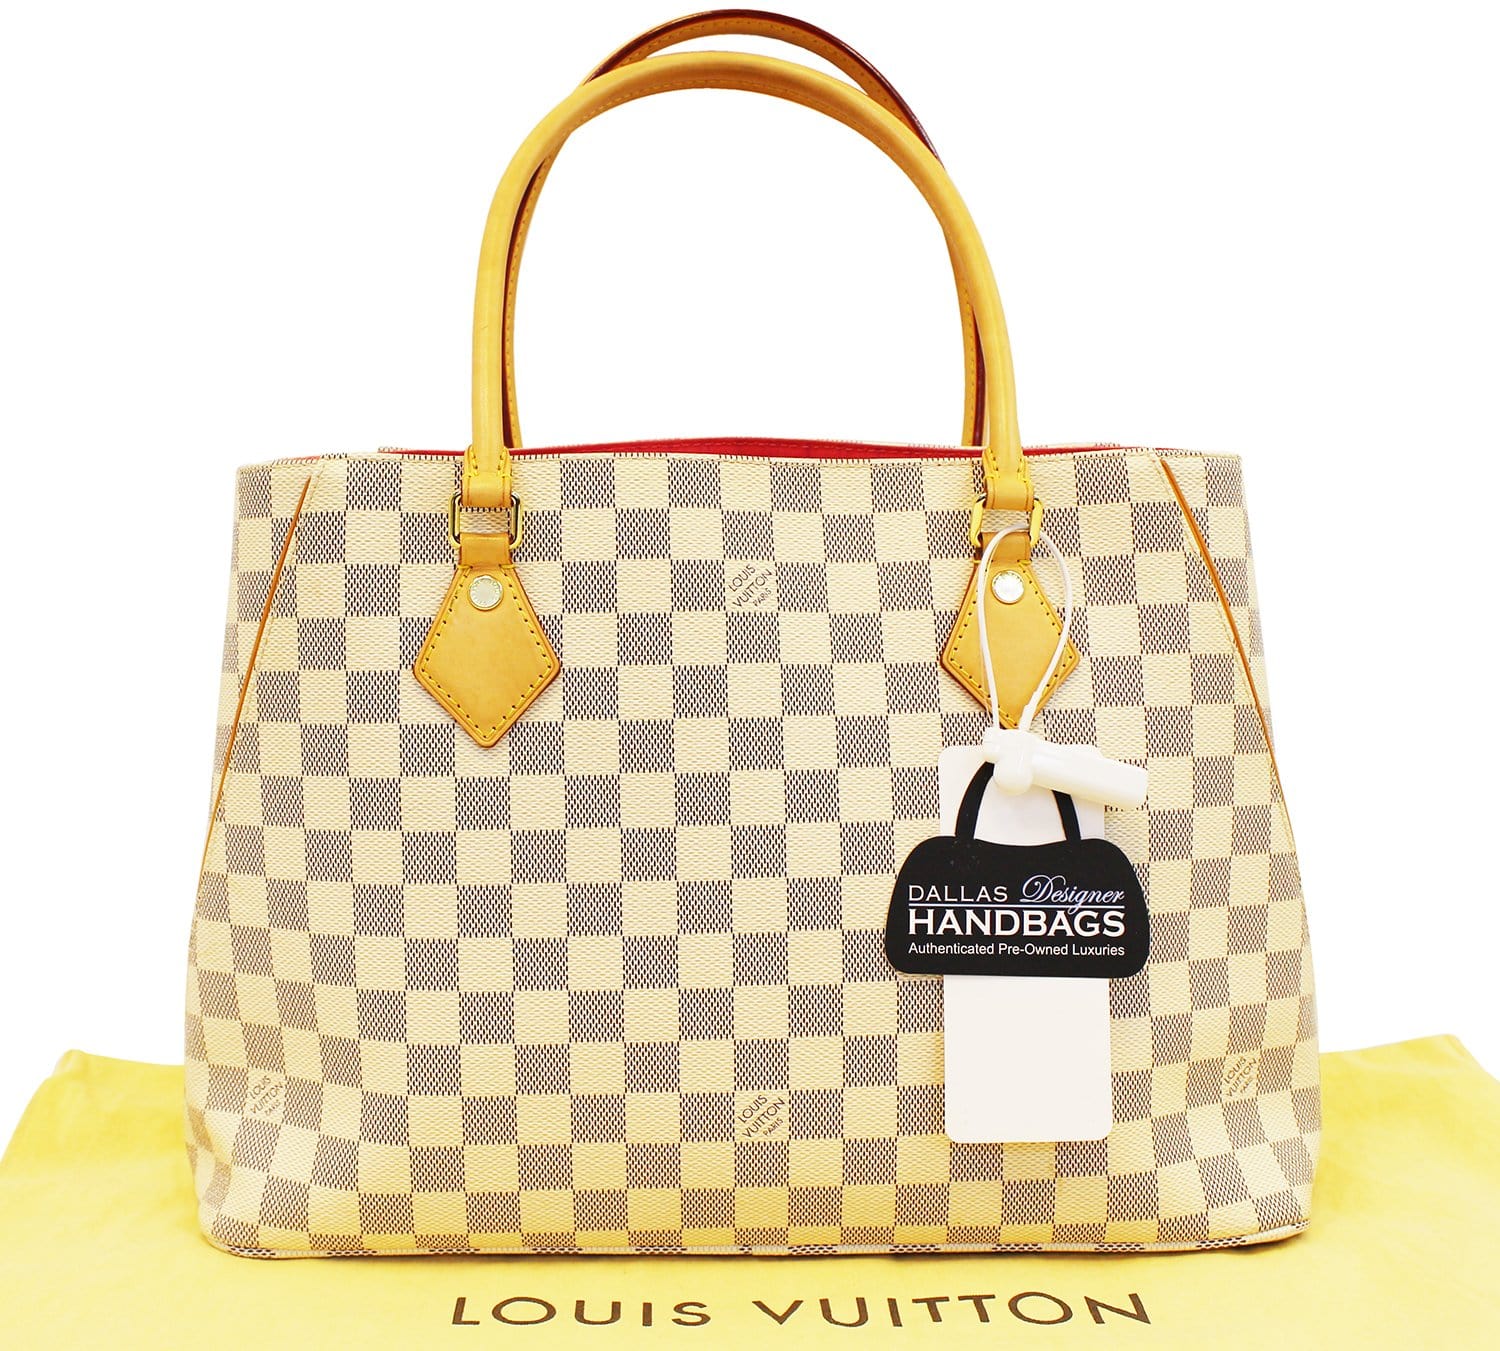 Louis Vuitton - Authenticated Onthego Handbag - Cloth White For Woman, Never Worn